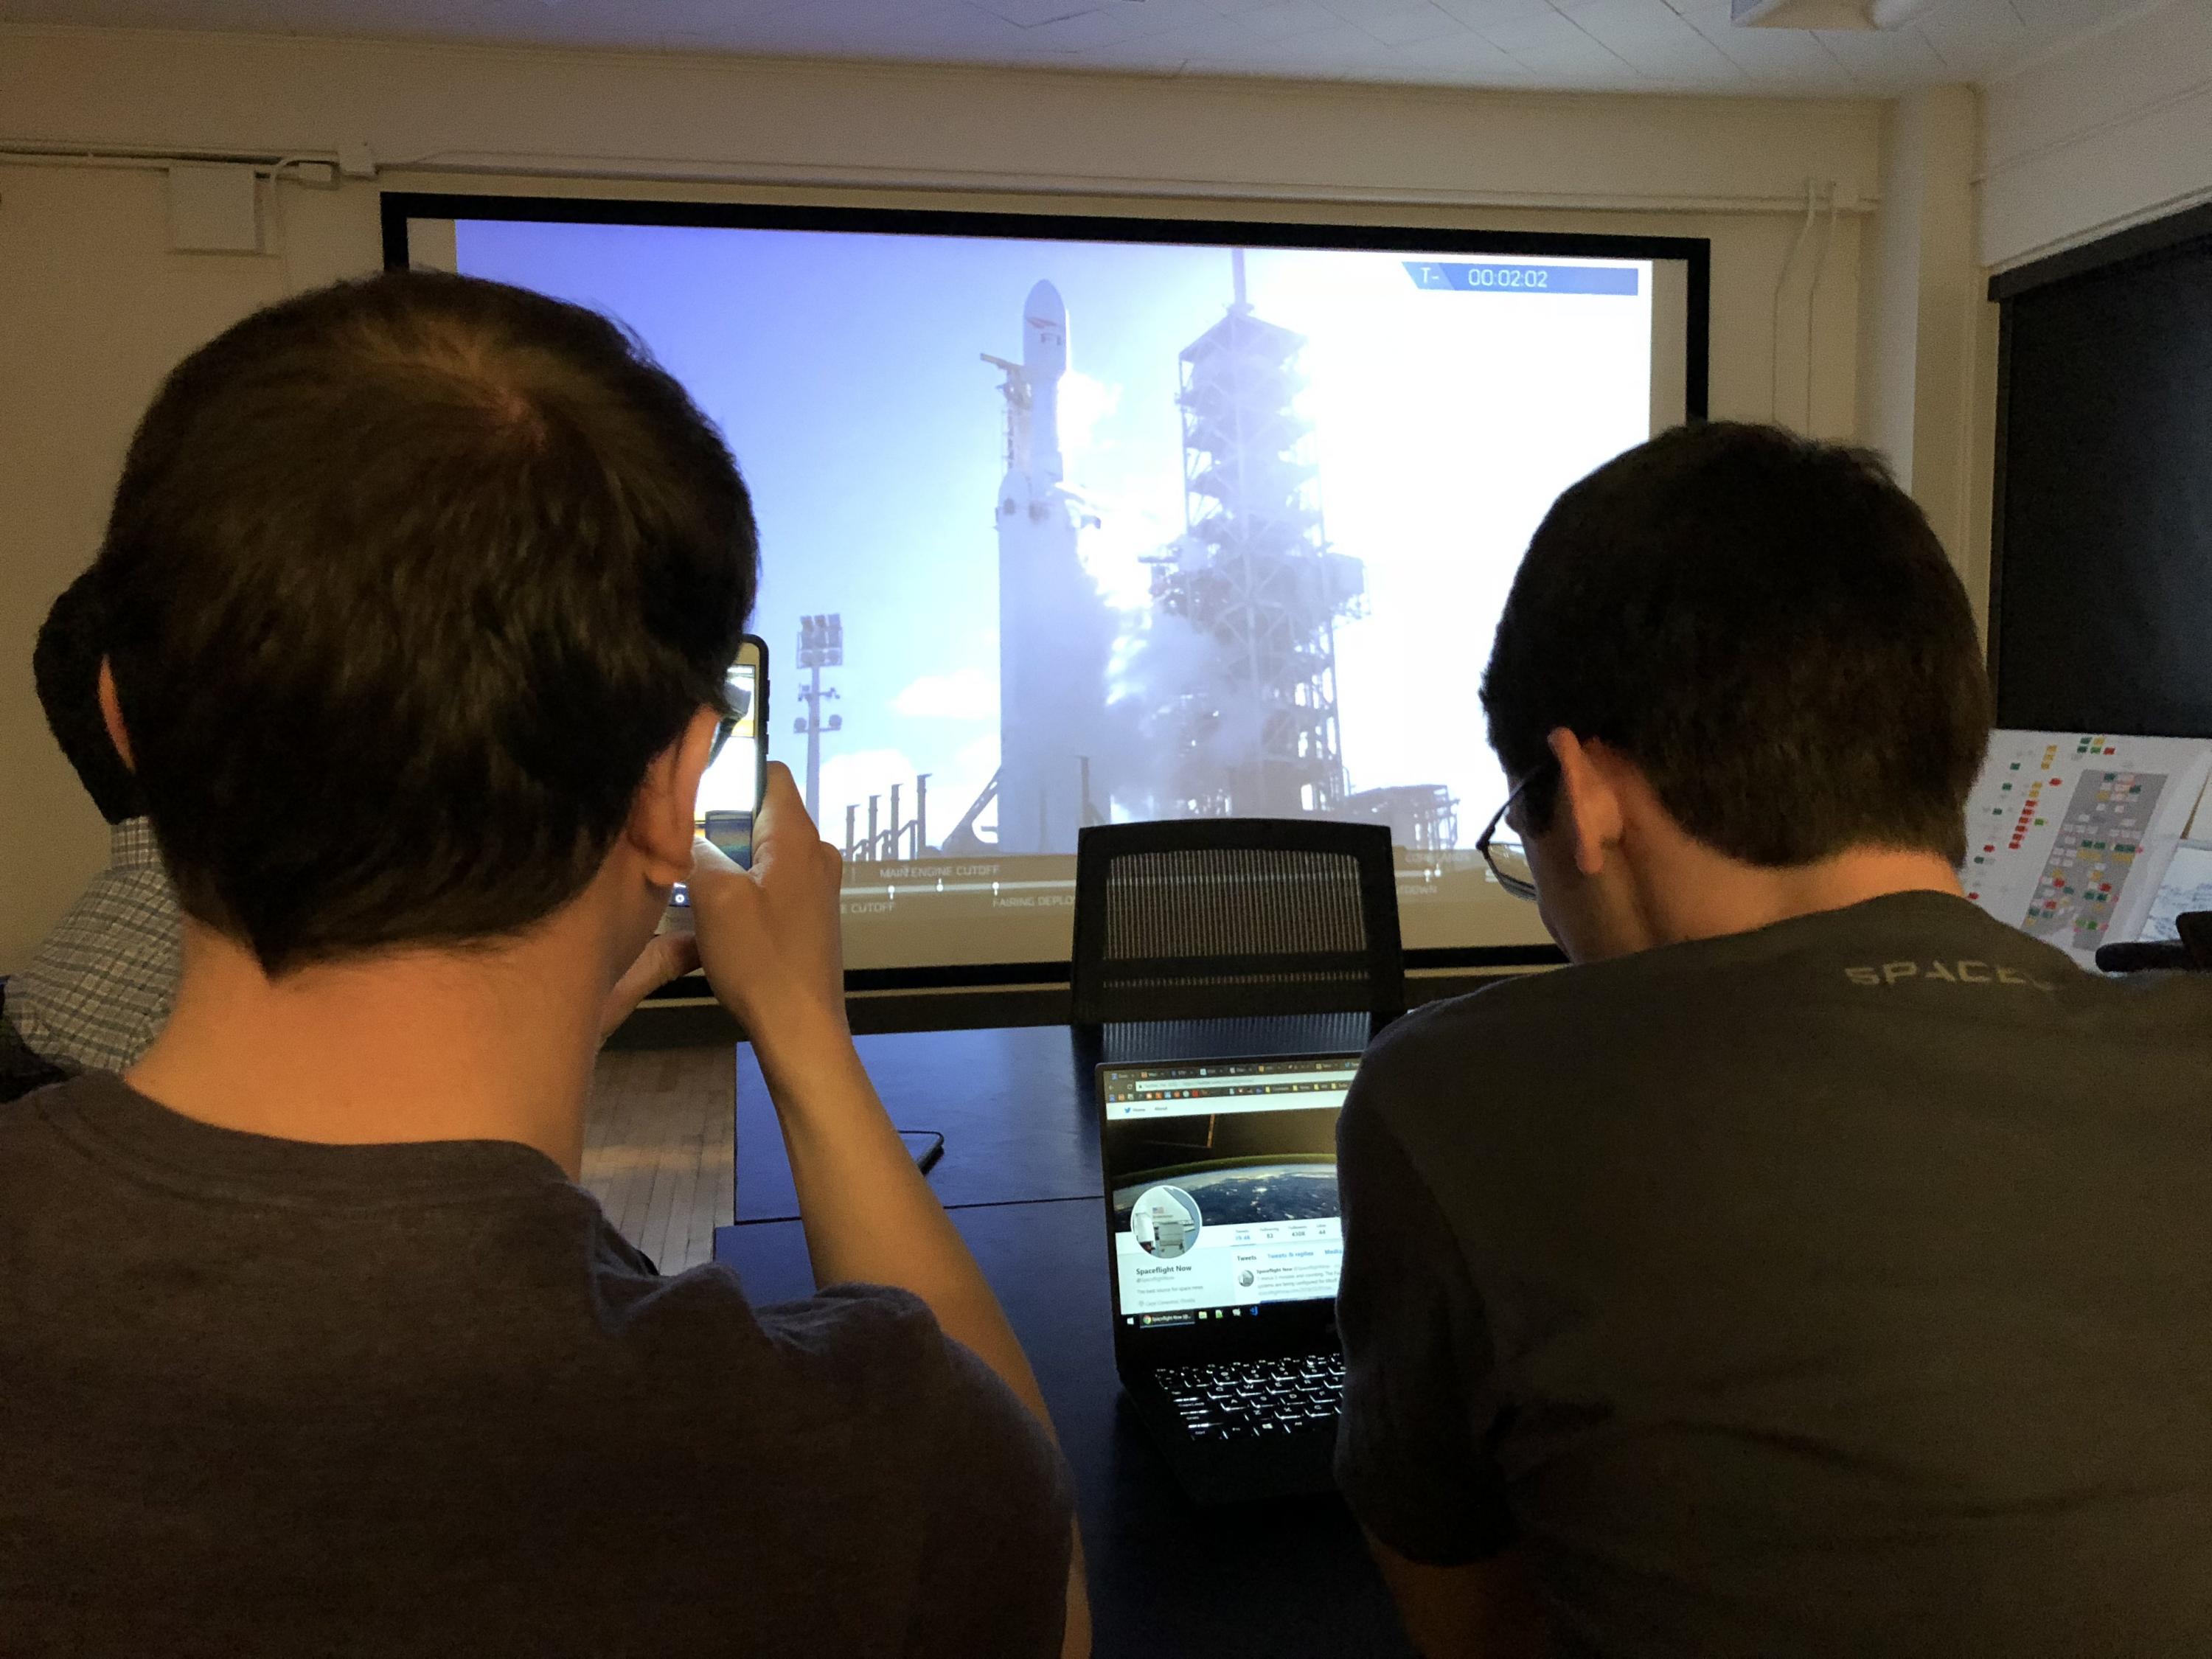 Aerospace engineering students watch a livestream of the SpaceX Falcon Heavy livestream on February 6.